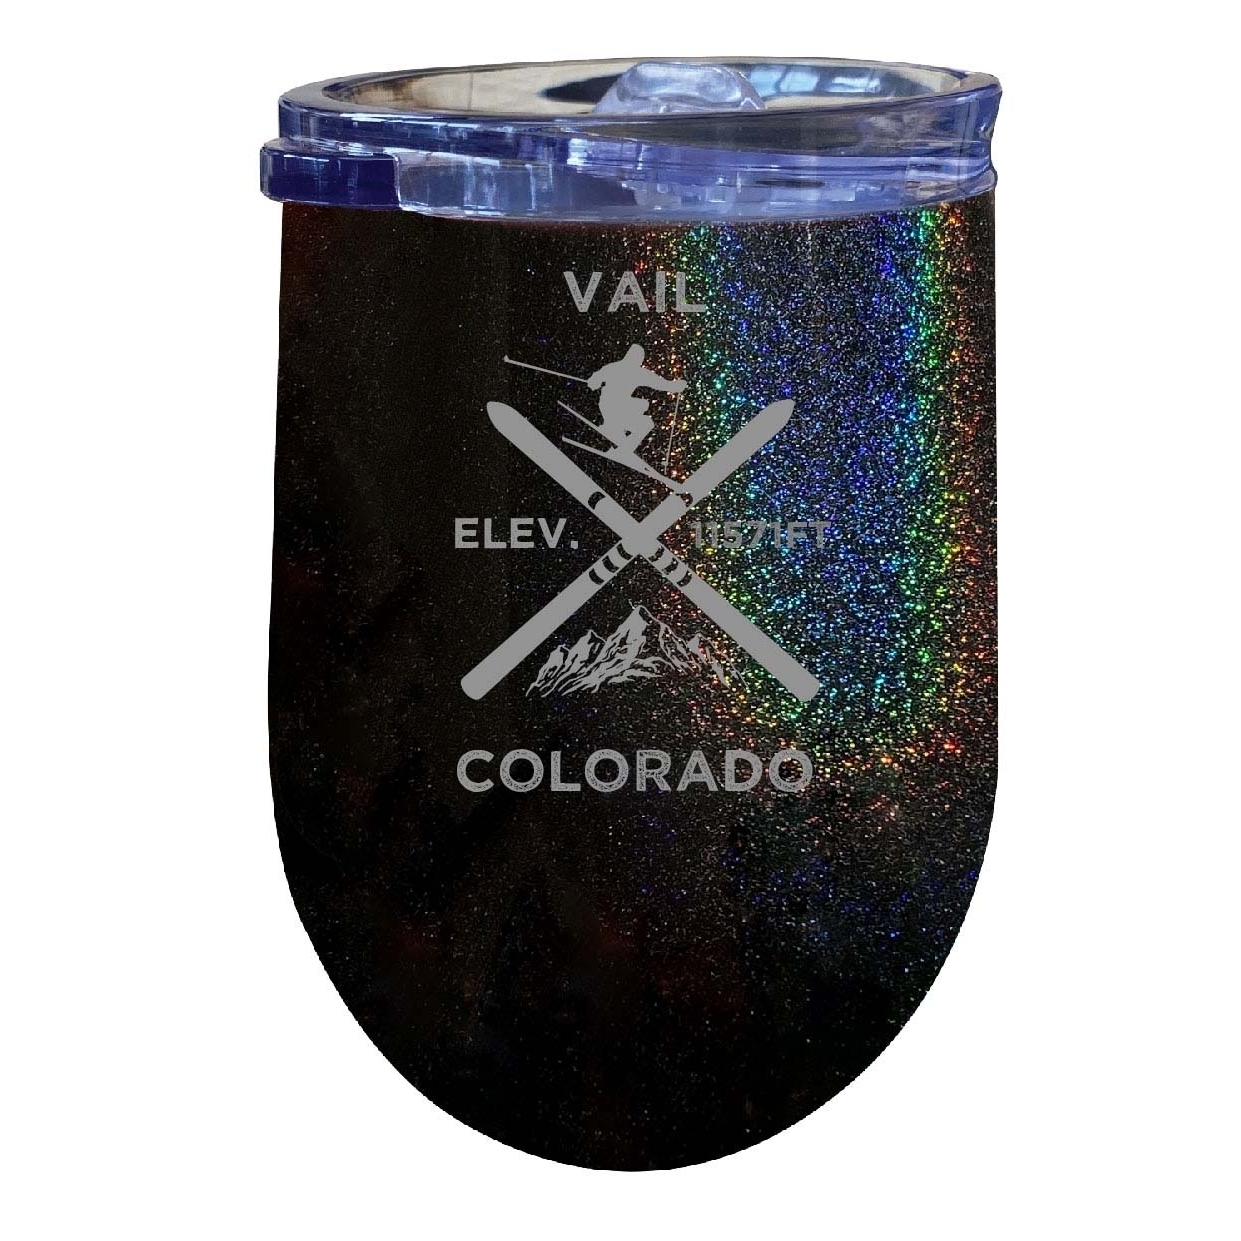 Vail Colorado Ski Souvenir 12 Oz Laser Etched Insulated Wine Stainless Steel Tumbler - Rainbow Glitter Black